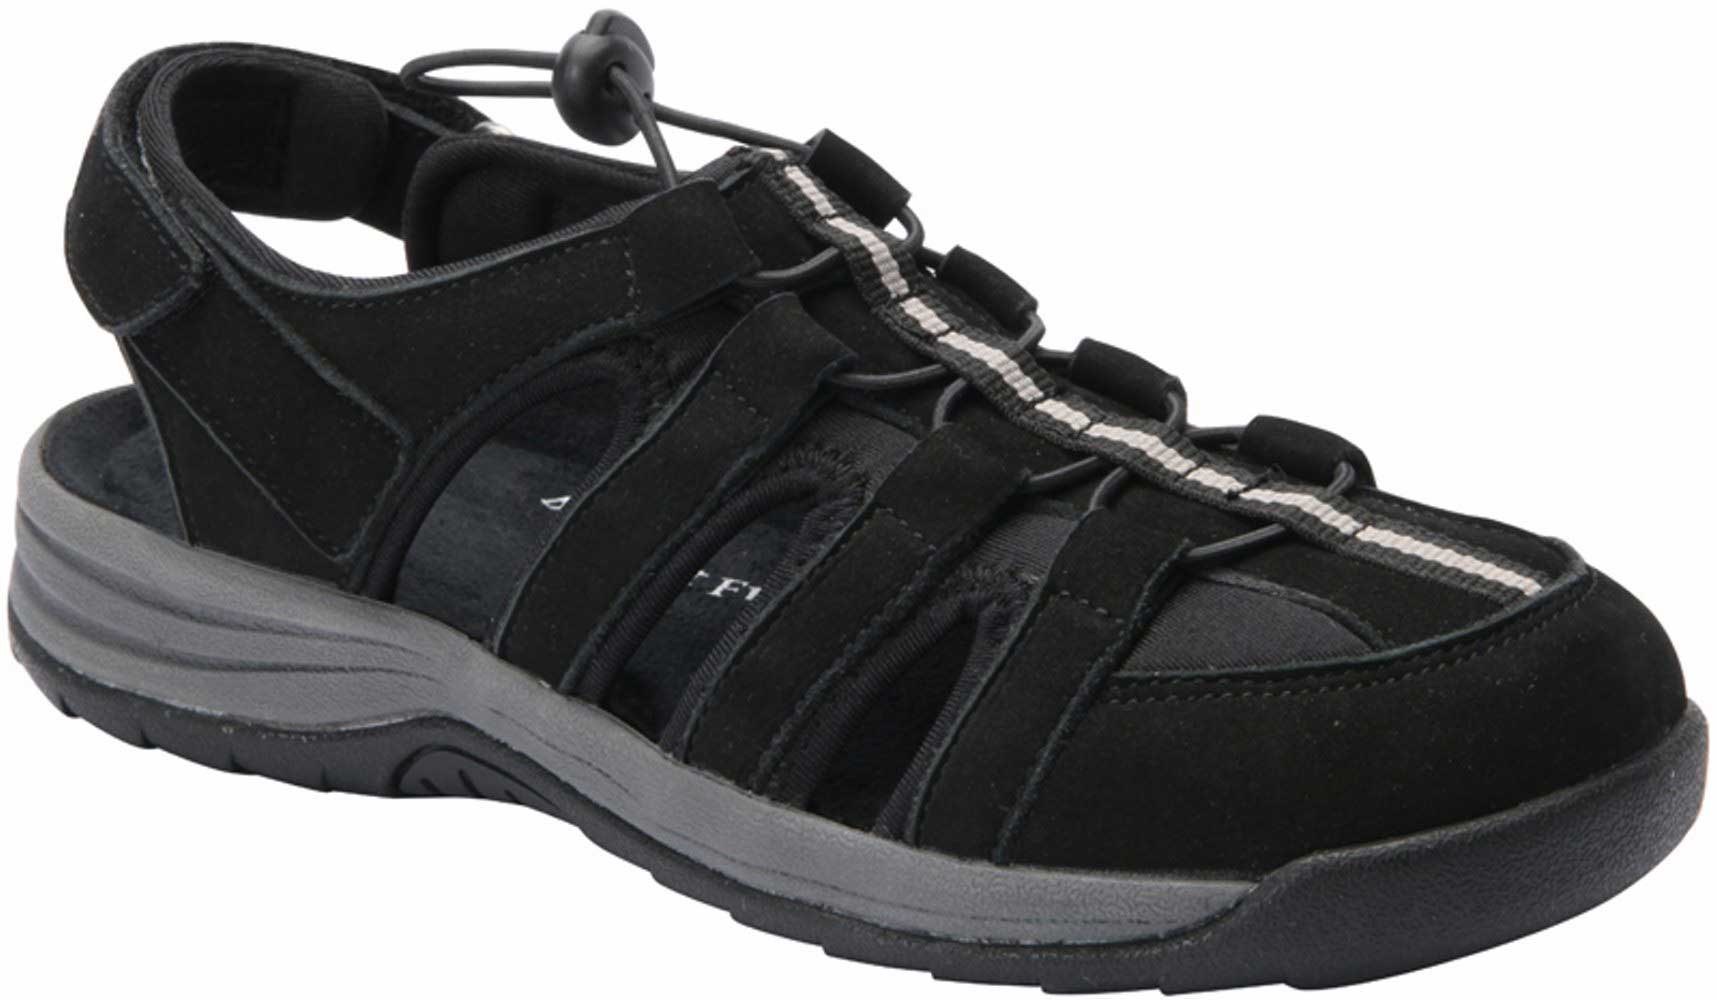 Drew Shoes Element 17031 Women's Casual Comfort Therapeutic Sandal - Extra Wide - Extra Depth